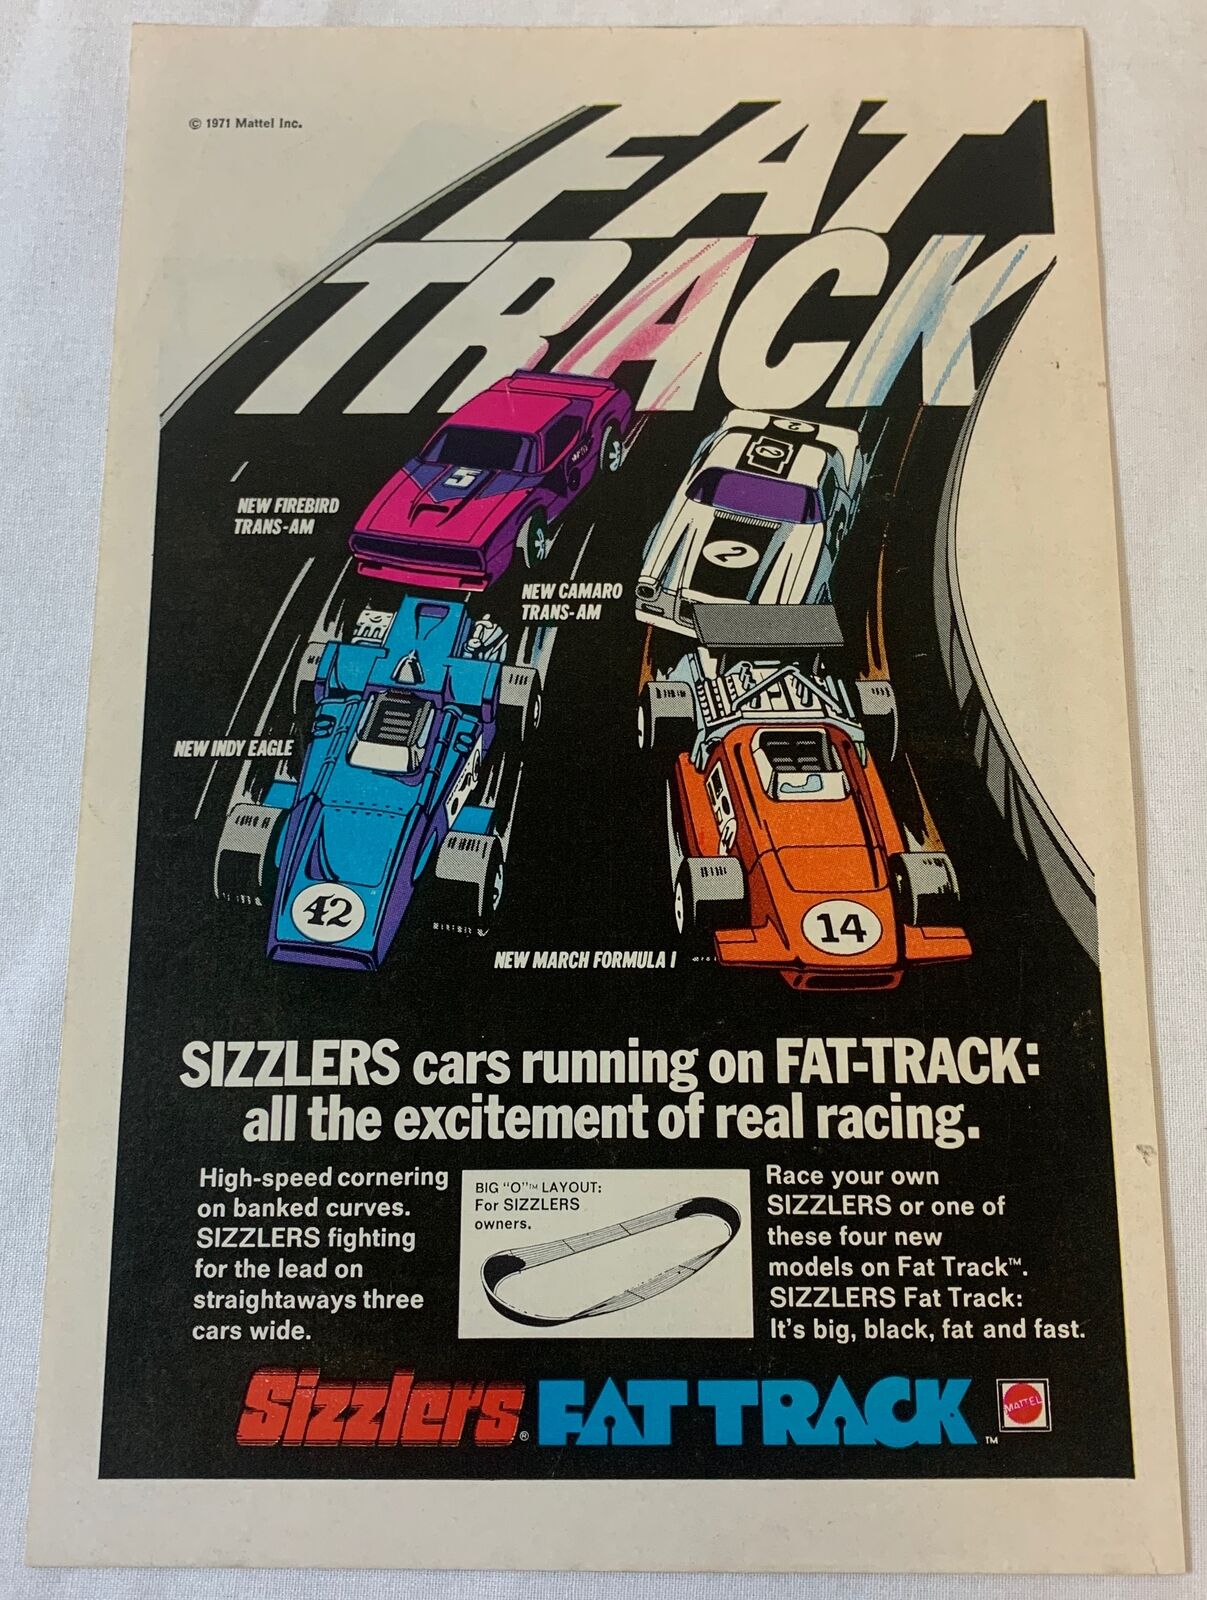 1971 Hot Wheels ad ~ SIZZLERS FAT TRACK ~ Firebird Trans-Am,Indy Eagle, more